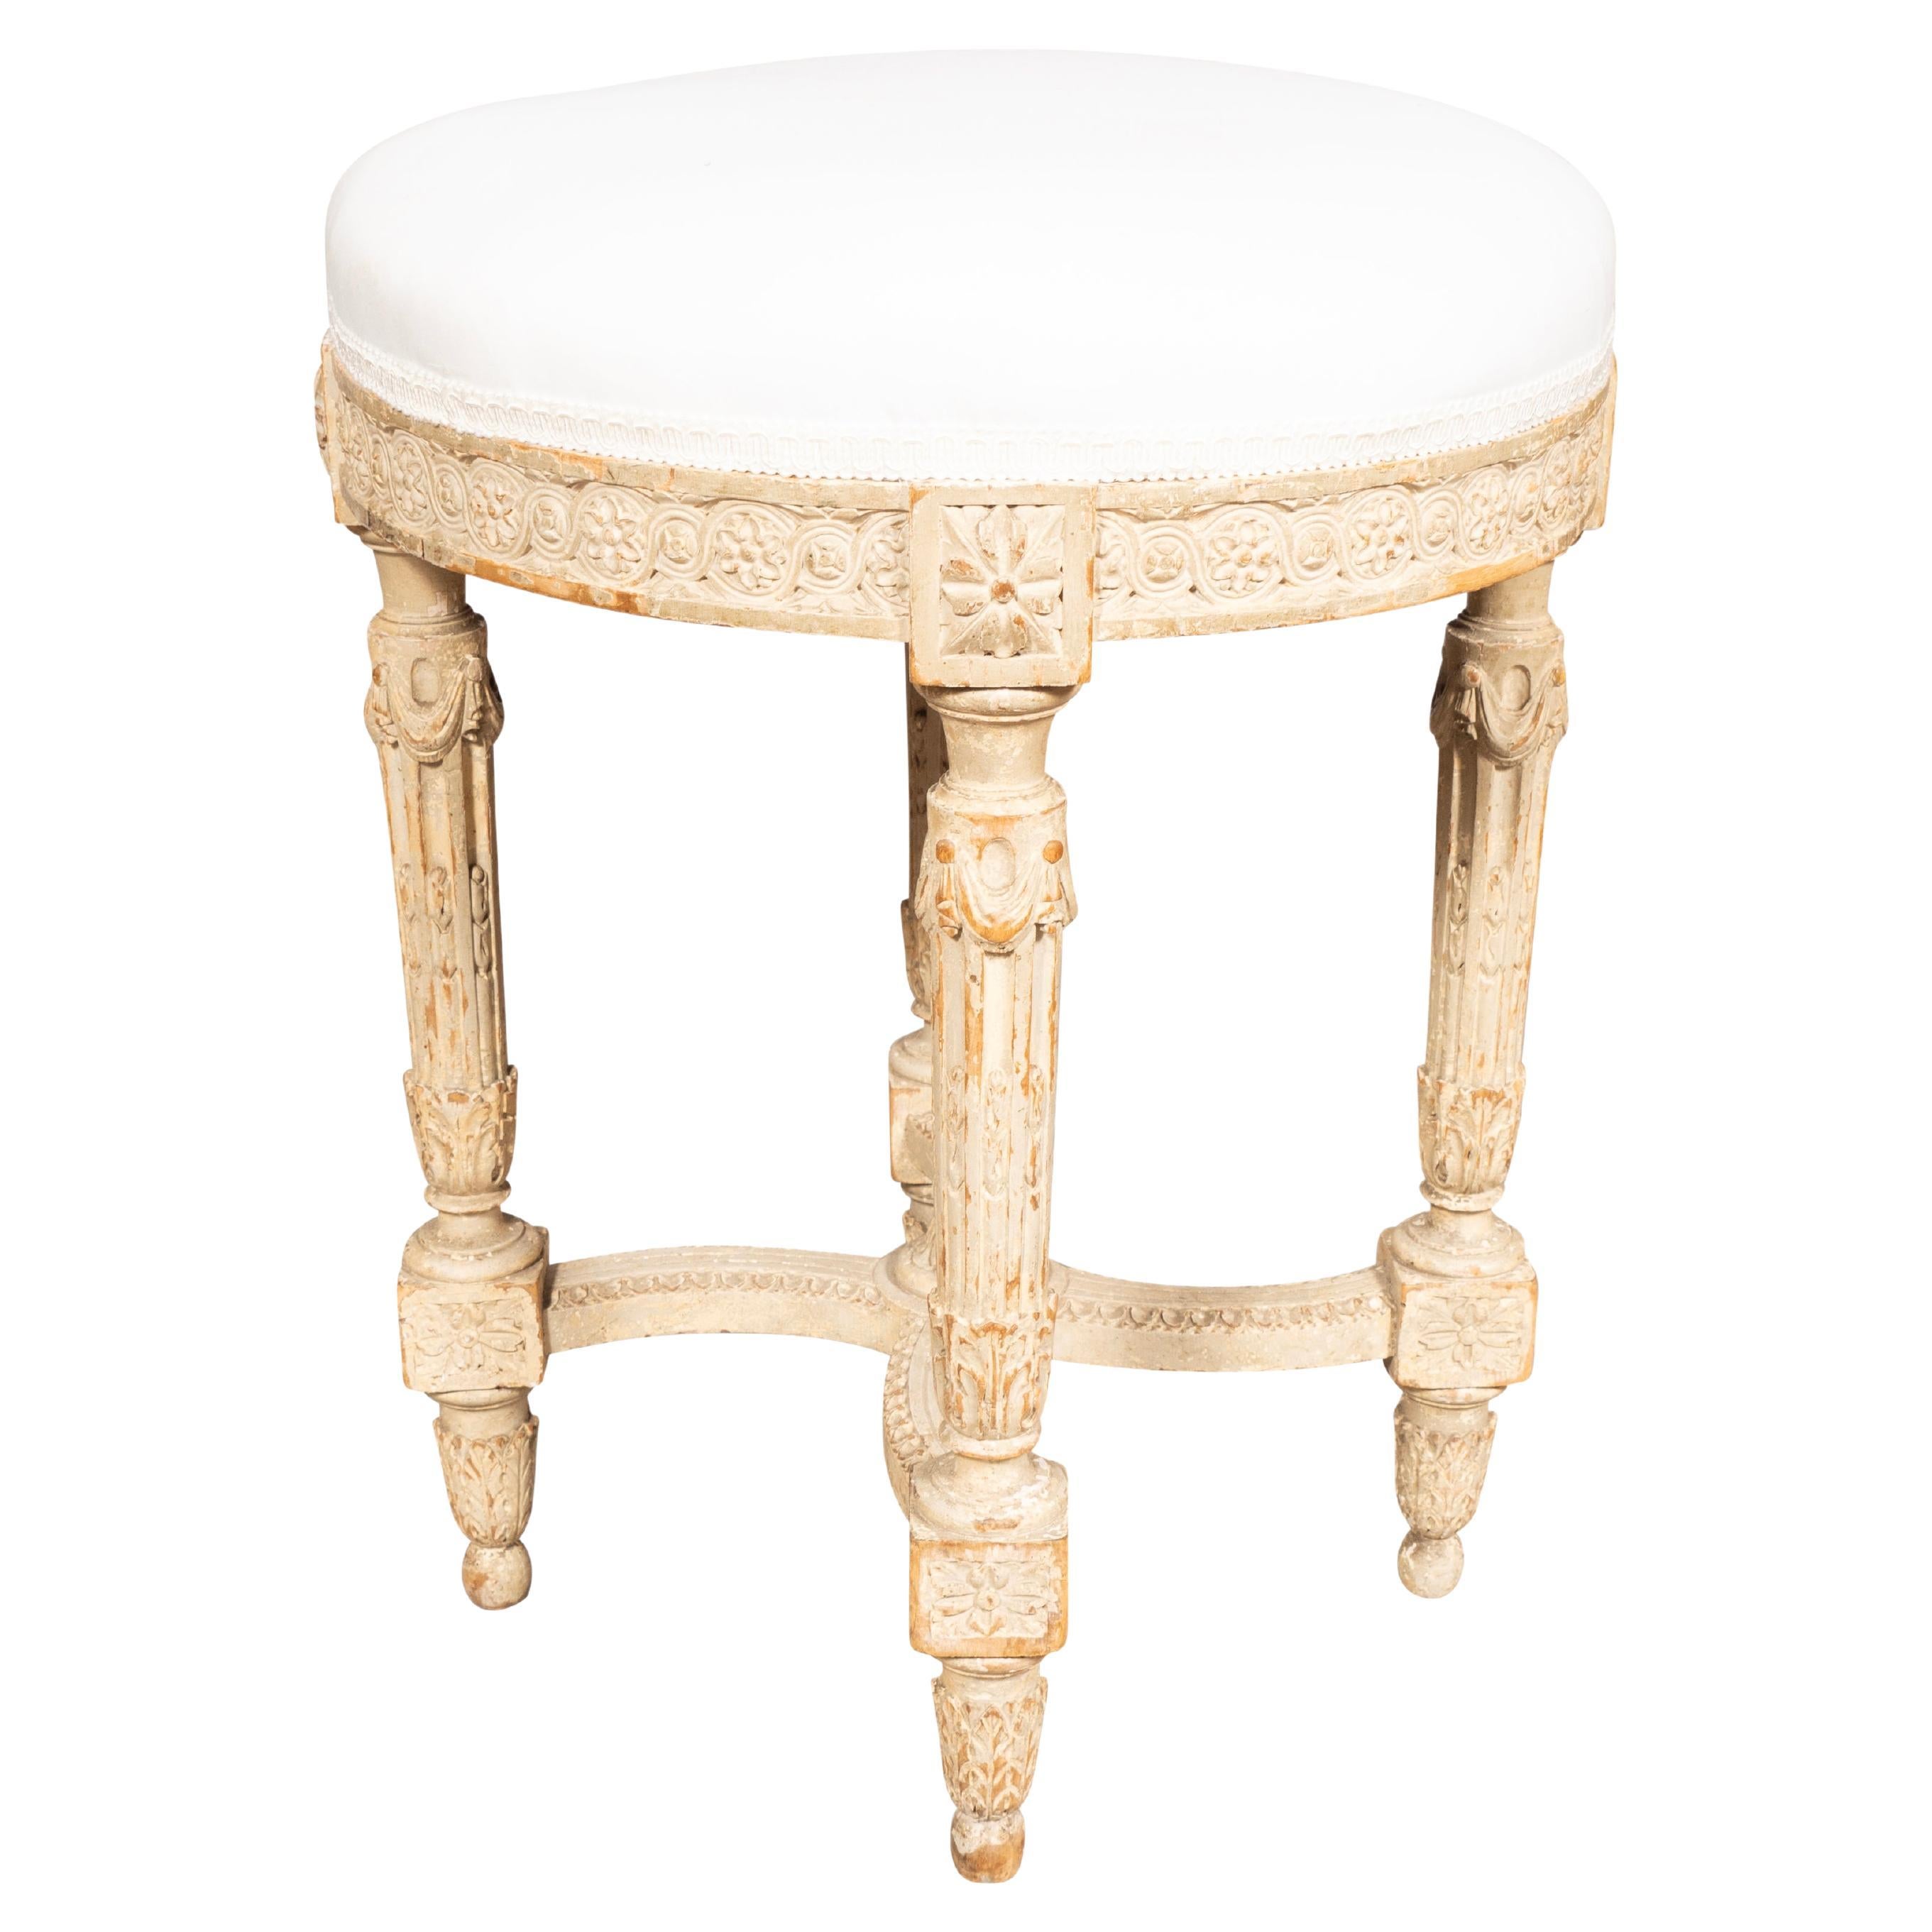 Louis XVI Style Creme Painted Tabouret